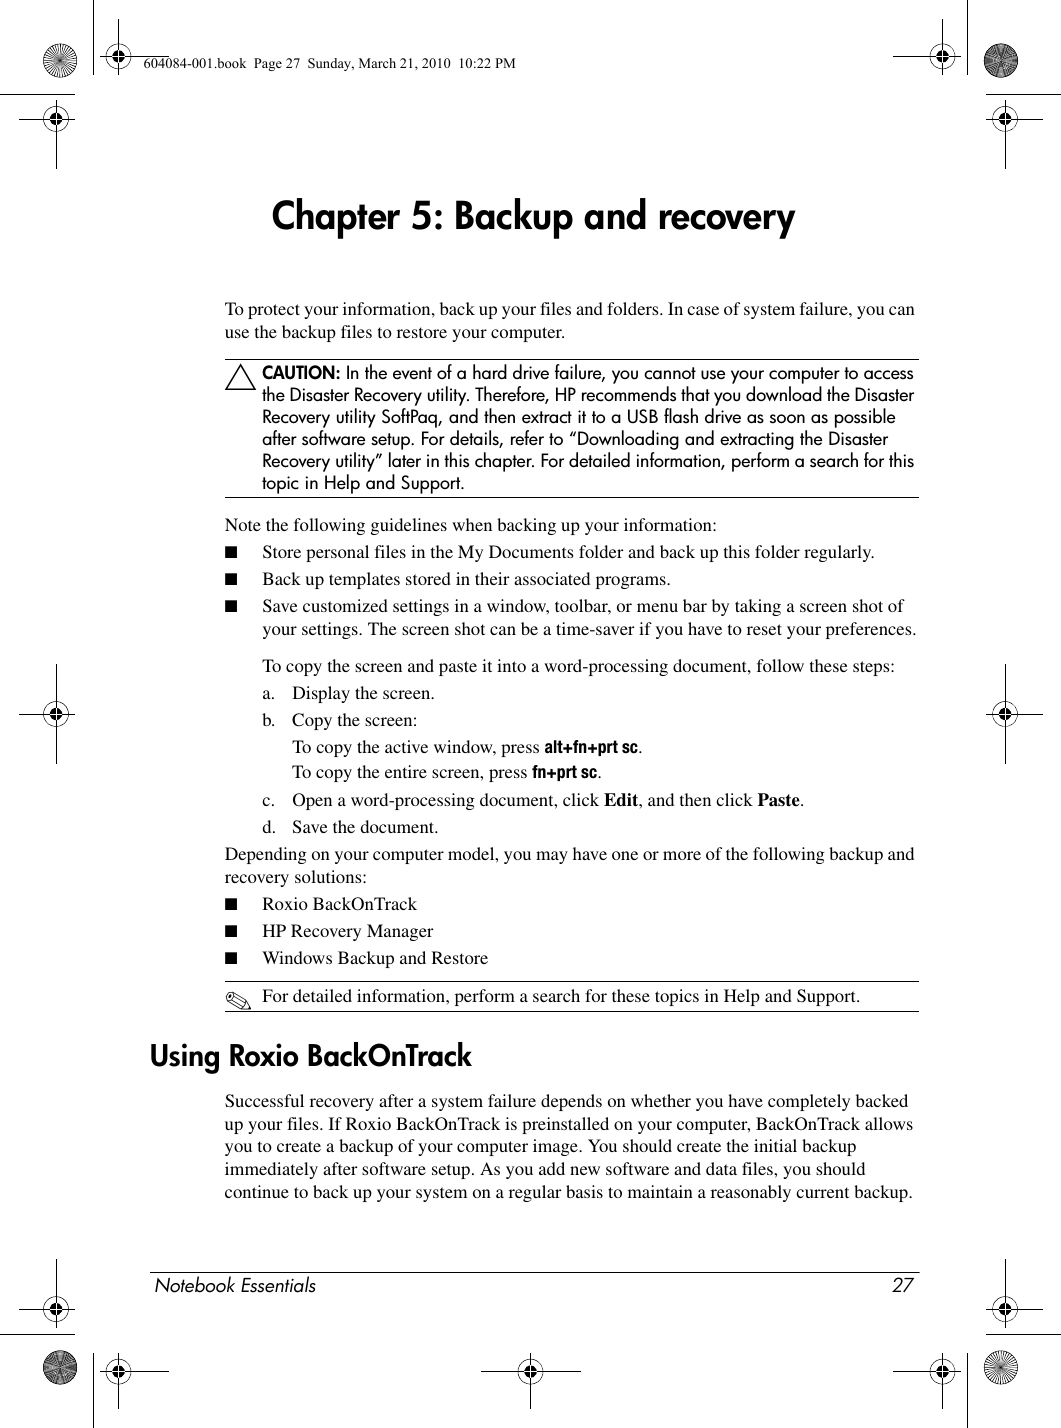 Notebook Essentials 27Chapter 5: Backup and recoveryTo protect your information, back up your files and folders. In case of system failure, you can use the backup files to restore your computer.ÄCAUTION: In the event of a hard drive failure, you cannot use your computer to access the Disaster Recovery utility. Therefore, HP recommends that you download the Disaster Recovery utility SoftPaq, and then extract it to a USB flash drive as soon as possible after software setup. For details, refer to “Downloading and extracting the Disaster Recovery utility” later in this chapter. For detailed information, perform a search for this topic in Help and Support.Note the following guidelines when backing up your information:■Store personal files in the My Documents folder and back up this folder regularly.■Back up templates stored in their associated programs.■Save customized settings in a window, toolbar, or menu bar by taking a screen shot of your settings. The screen shot can be a time-saver if you have to reset your preferences.To copy the screen and paste it into a word-processing document, follow these steps:a. Display the screen.b. Copy the screen: To copy the active window, press alt+fn+prt sc.To copy the entire screen, press fn+prt sc.c. Open a word-processing document, click Edit, and then click Paste.d. Save the document.Depending on your computer model, you may have one or more of the following backup and recovery solutions:■Roxio BackOnTrack■HP Recovery Manager■Windows Backup and Restore✎For detailed information, perform a search for these topics in Help and Support.Successful recovery after a system failure depends on whether you have completely backed up your files. If Roxio BackOnTrack is preinstalled on your computer, BackOnTrack allows you to create a backup of your computer image. You should create the initial backup immediately after software setup. As you add new software and data files, you should continue to back up your system on a regular basis to maintain a reasonably current backup.Using Roxio BackOnTrack604084-001.book  Page 27  Sunday, March 21, 2010  10:22 PM